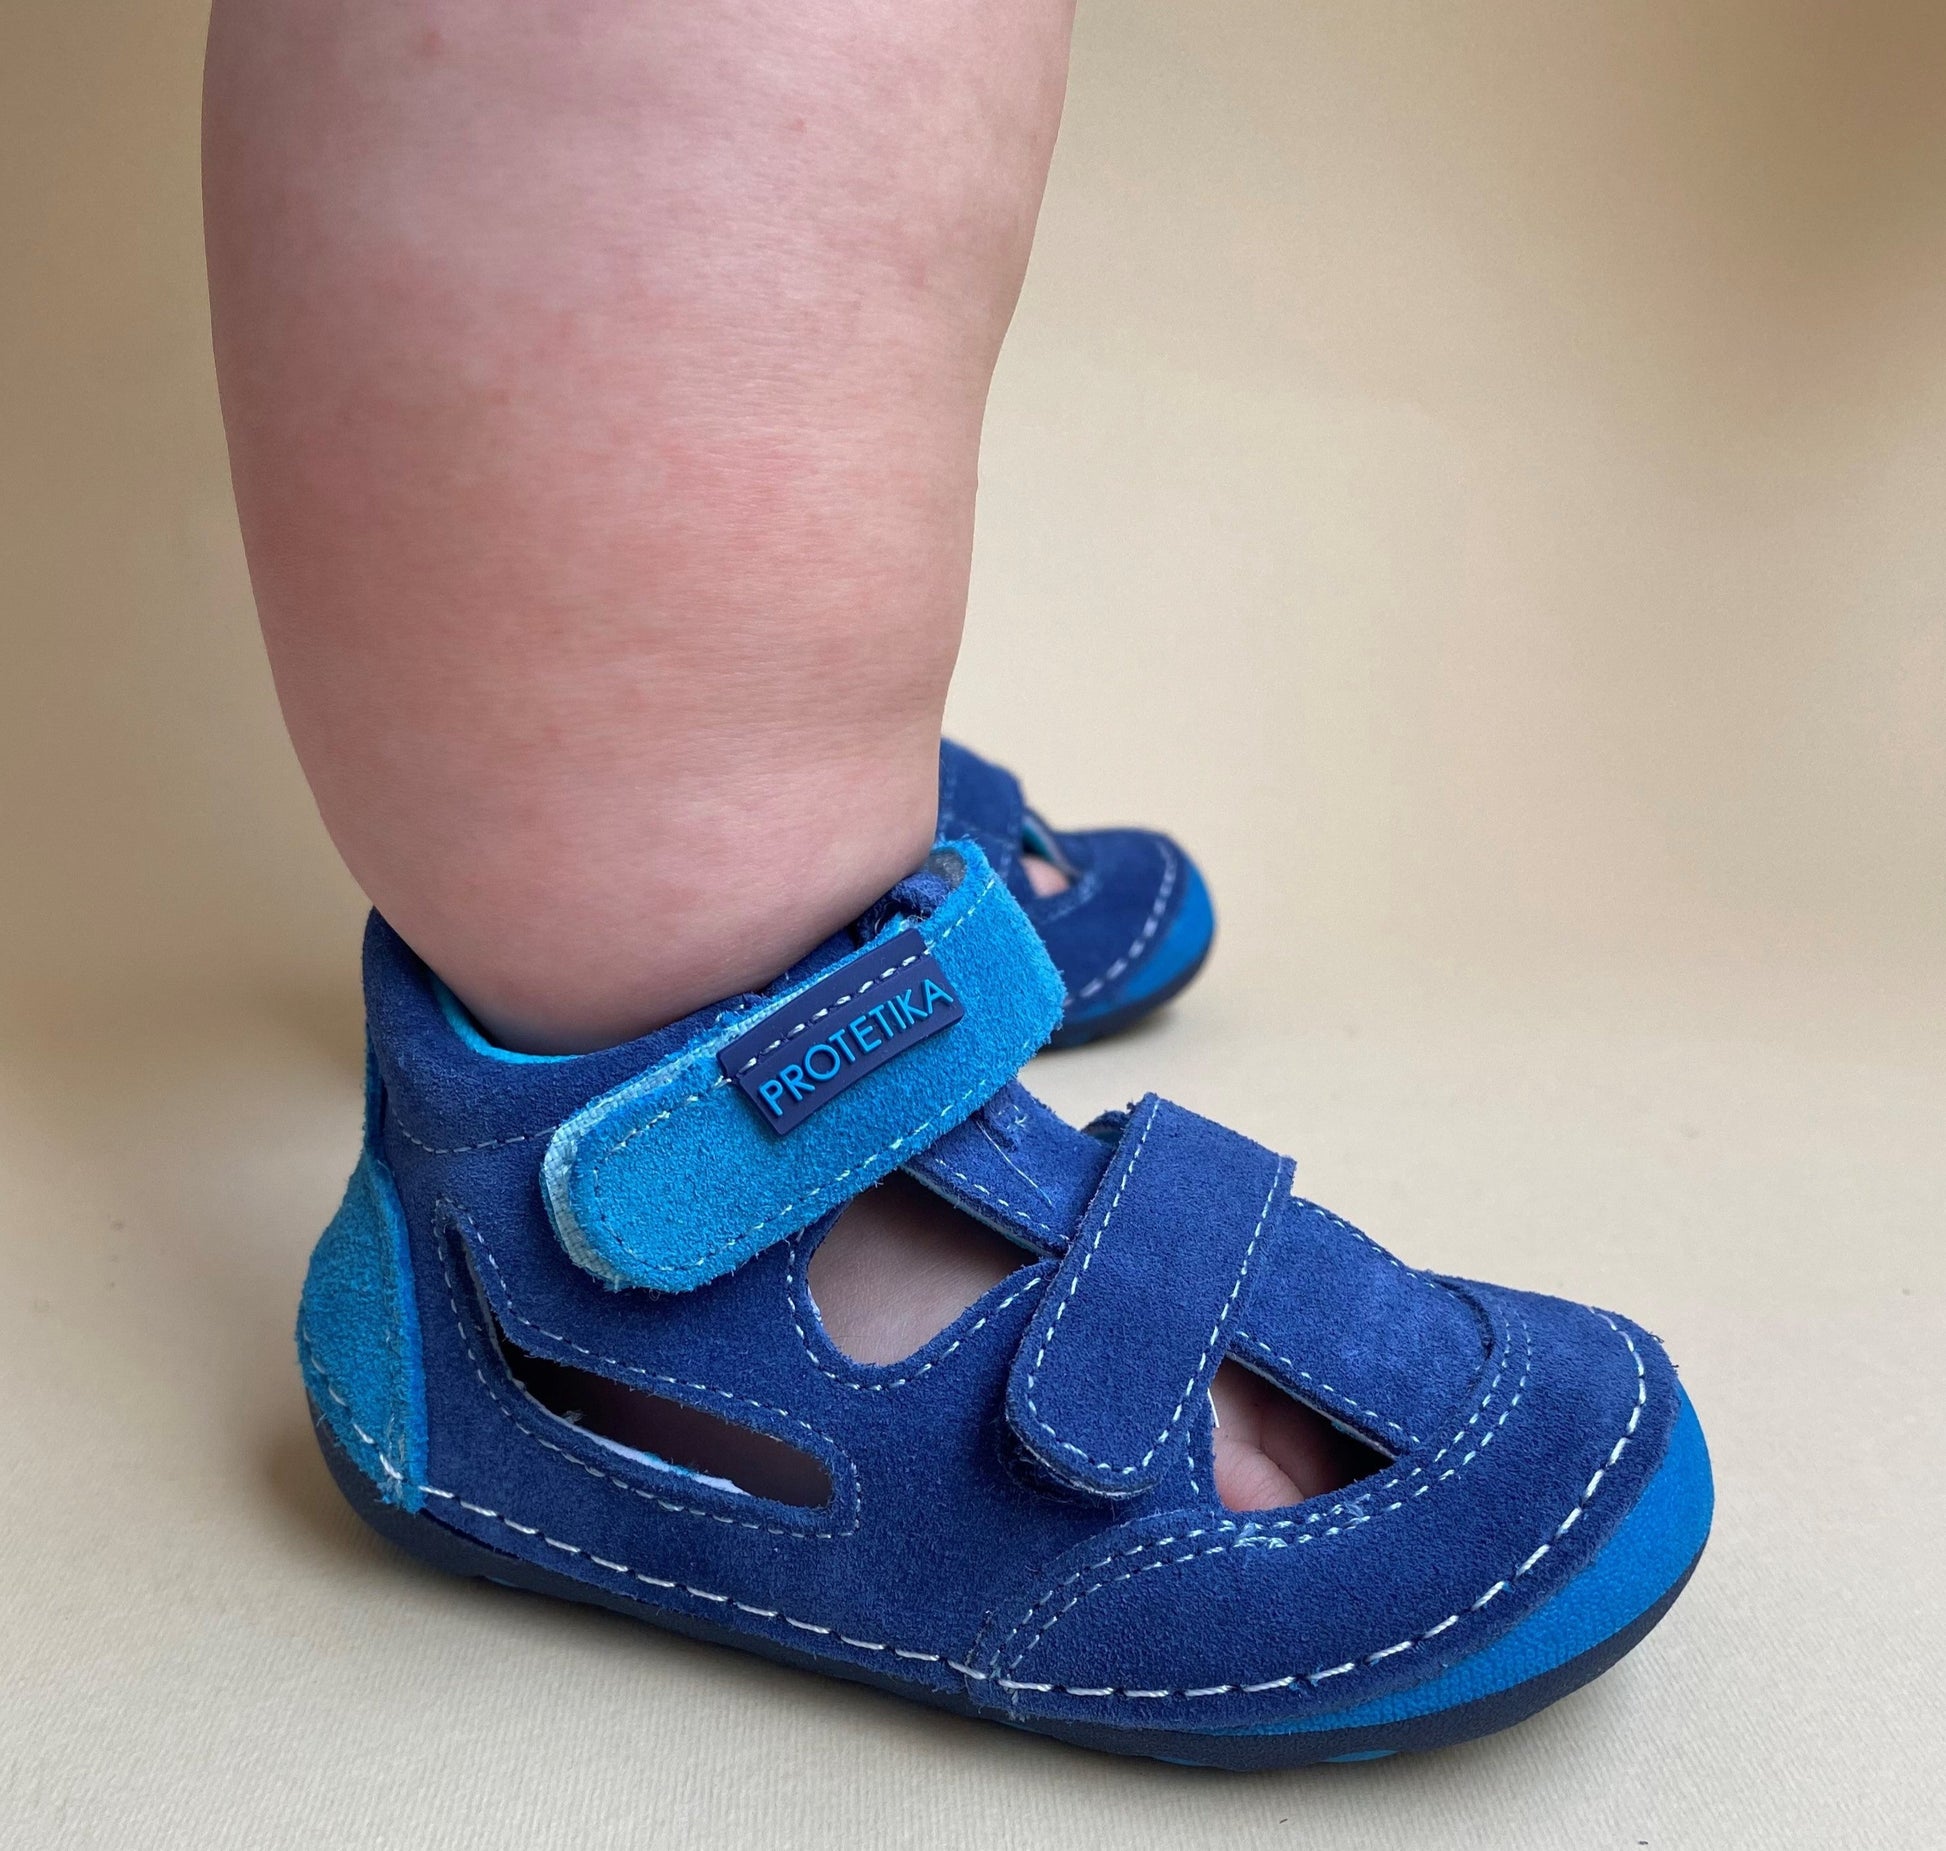 Barefoot sneakers for toddler boys, providing ample ventilation even in hot summer months.